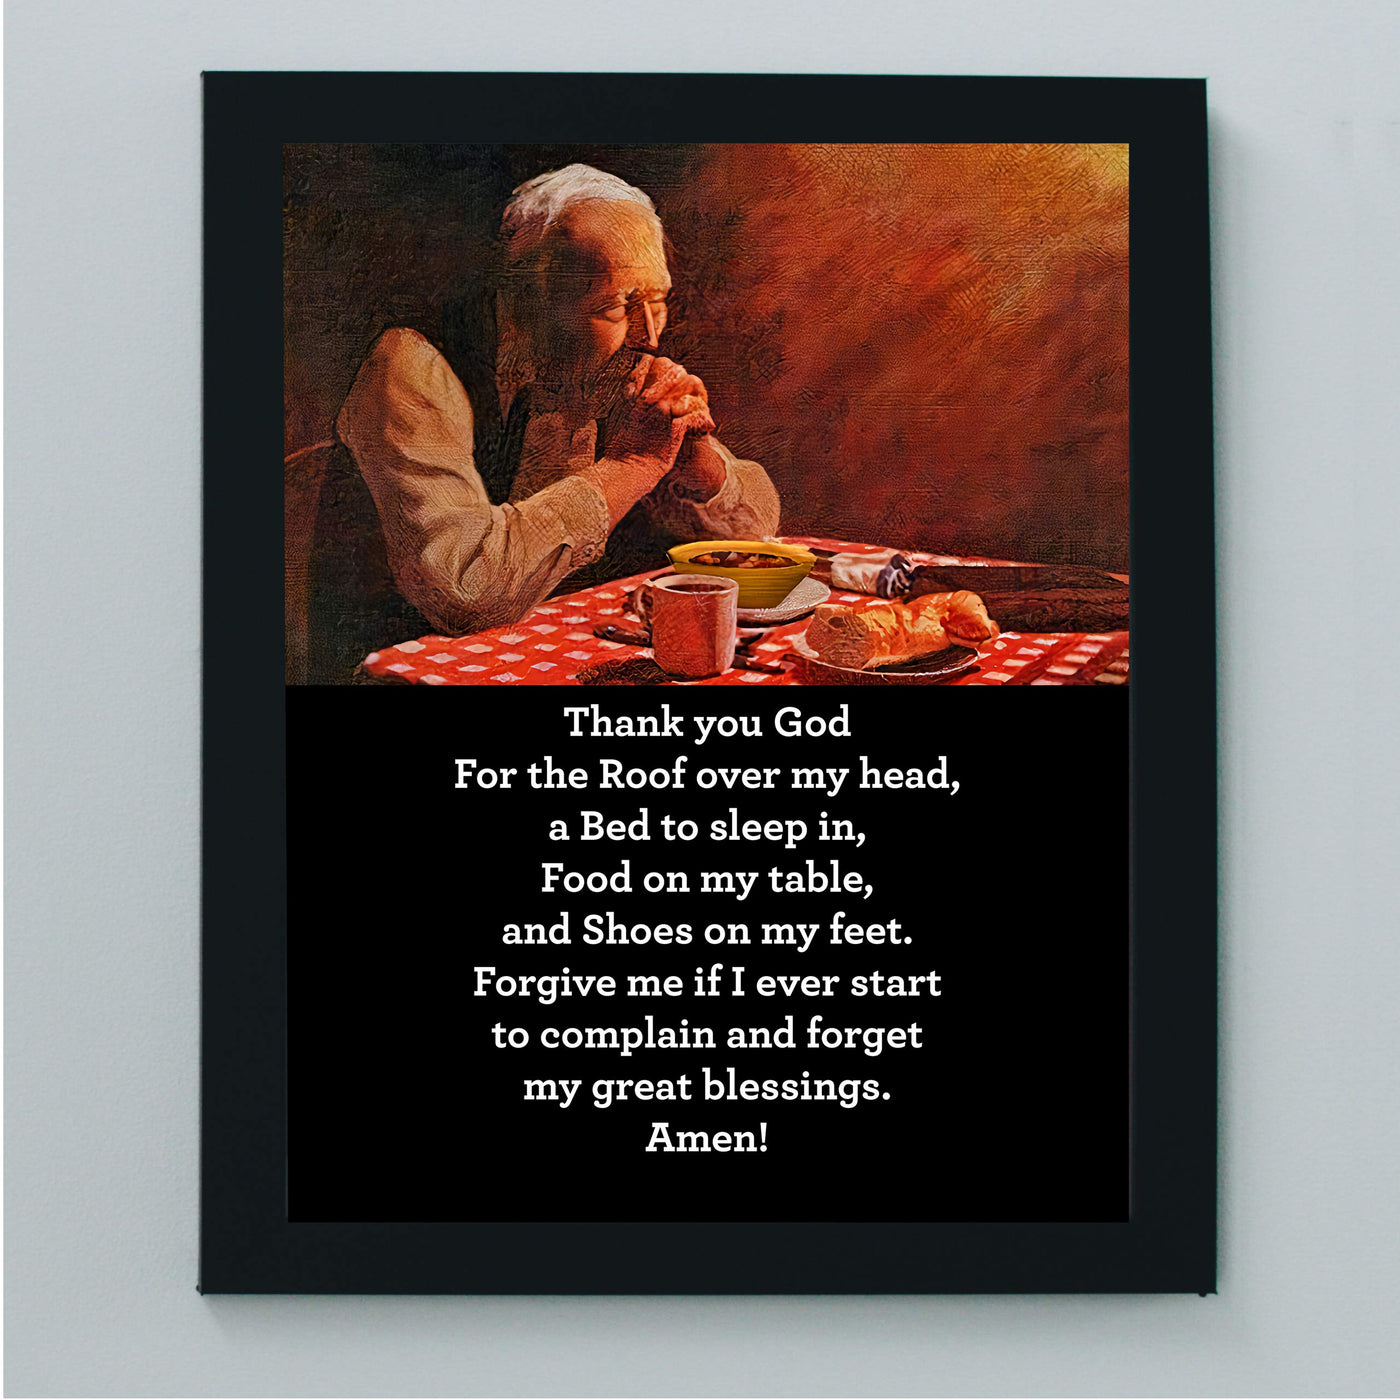 Thank You God for the Roof Over My Head Christian Prayer Wall Art -8 x 10" Inspirational Poster Print-Ready to Frame. Religious Home-Office-Studio-Church Decor. Great Motivational Gift of Faith!